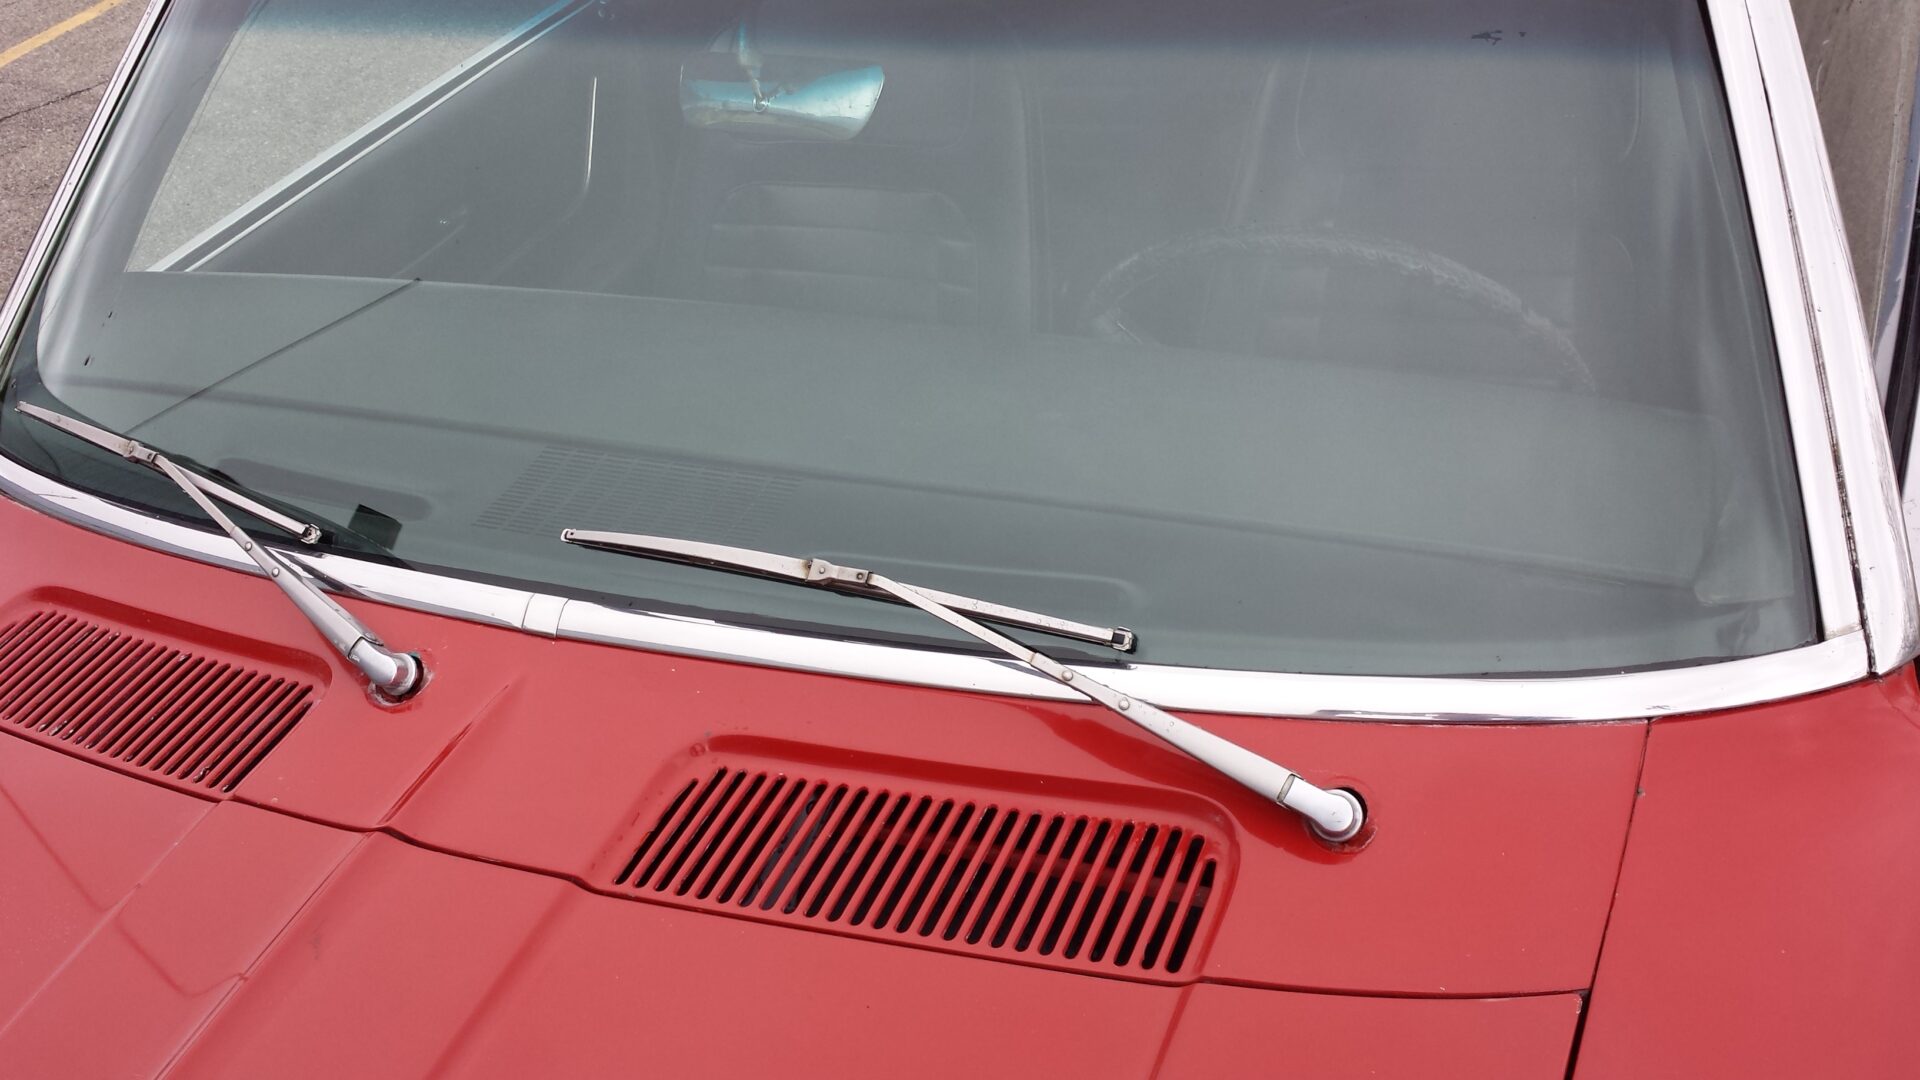 Wipers on the 1968 Chevy Camaro